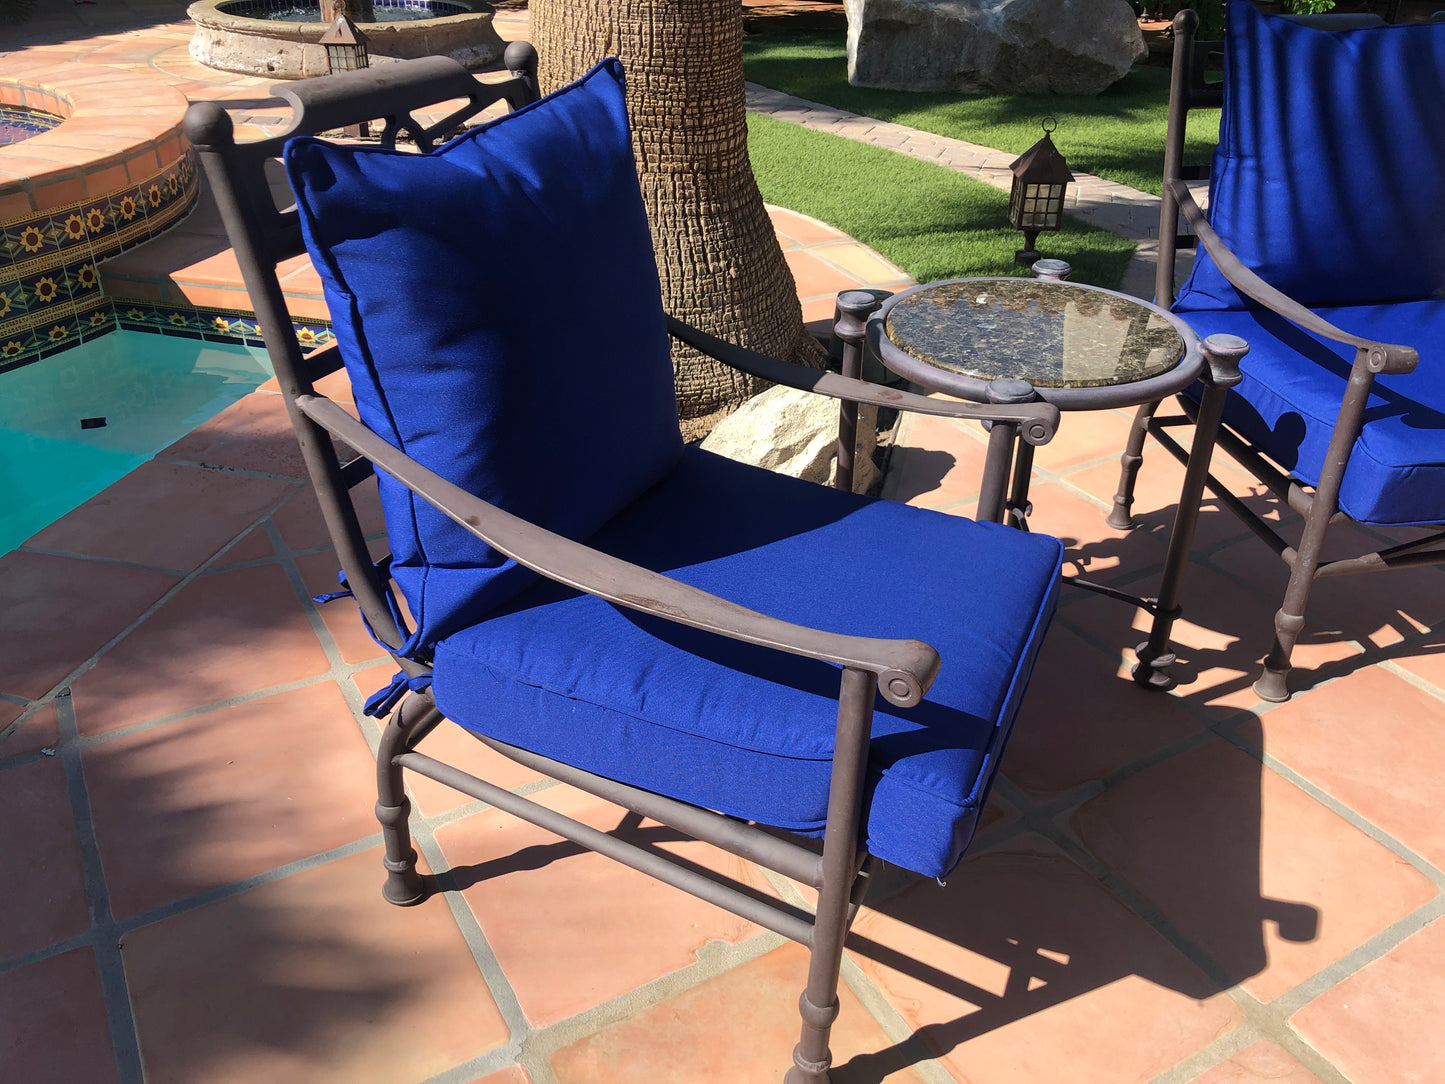 Blue Outdoor Cushions -2pc Set (back and seat cushions)